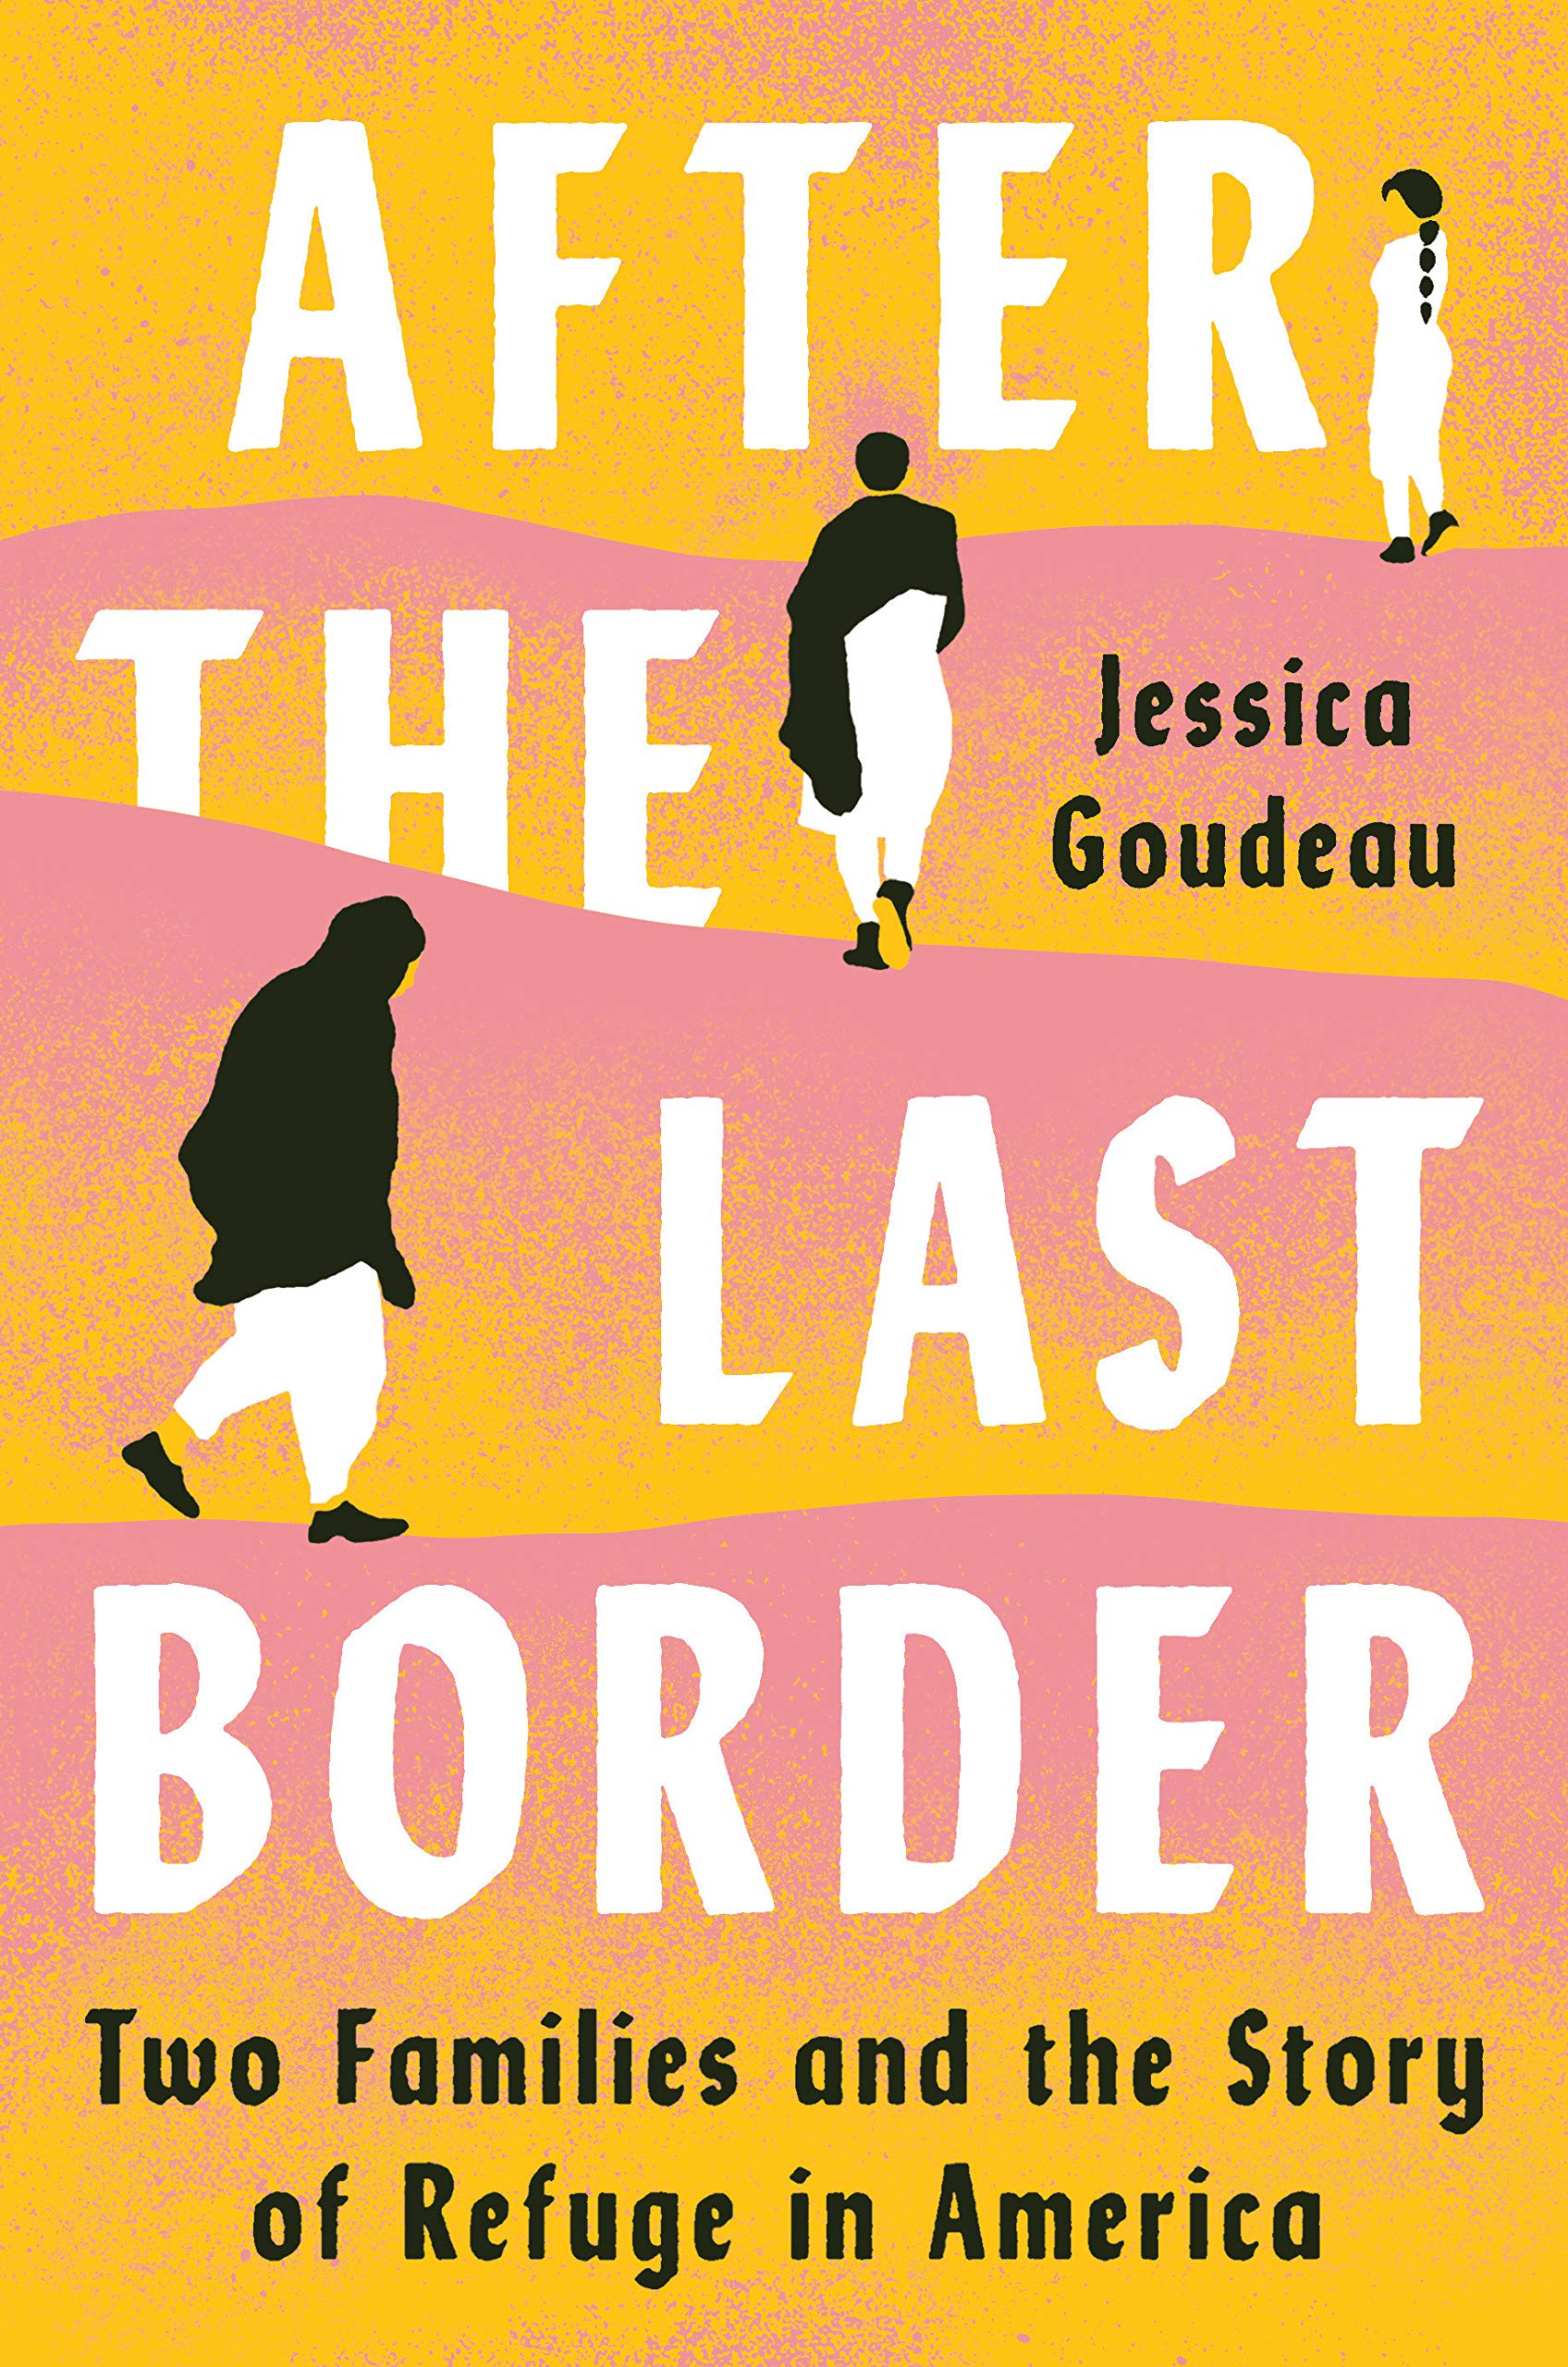 Image of the book cover of After the Last Border: Two Families and the Story of Refuge in America by Jessica Goudeau 